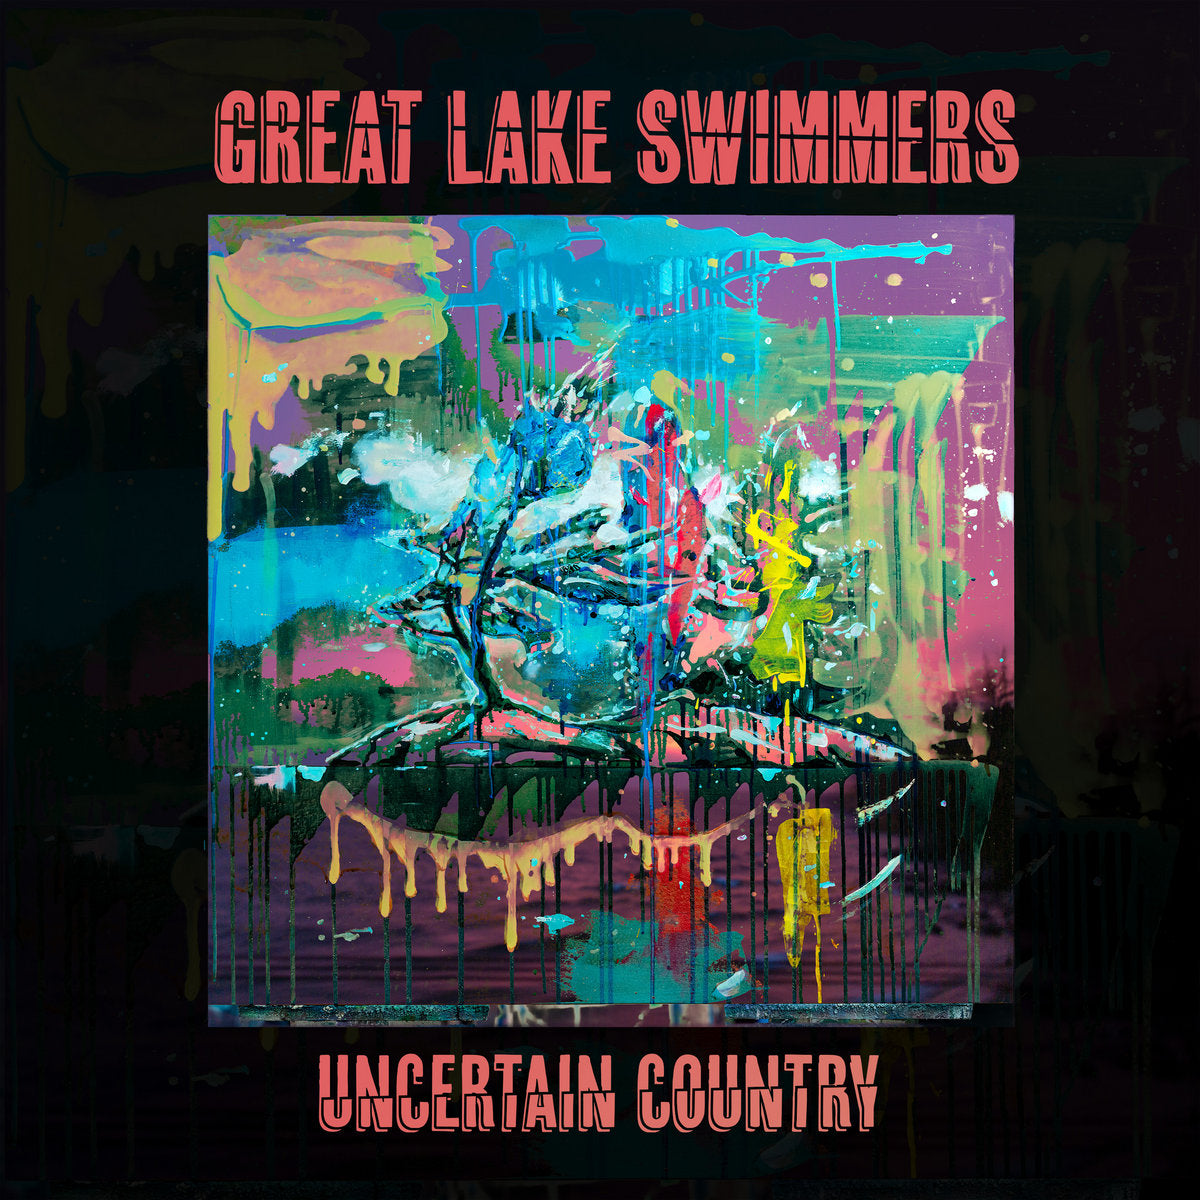 Great Lake Swimmers - Uncertain Country (Vinyl LP)